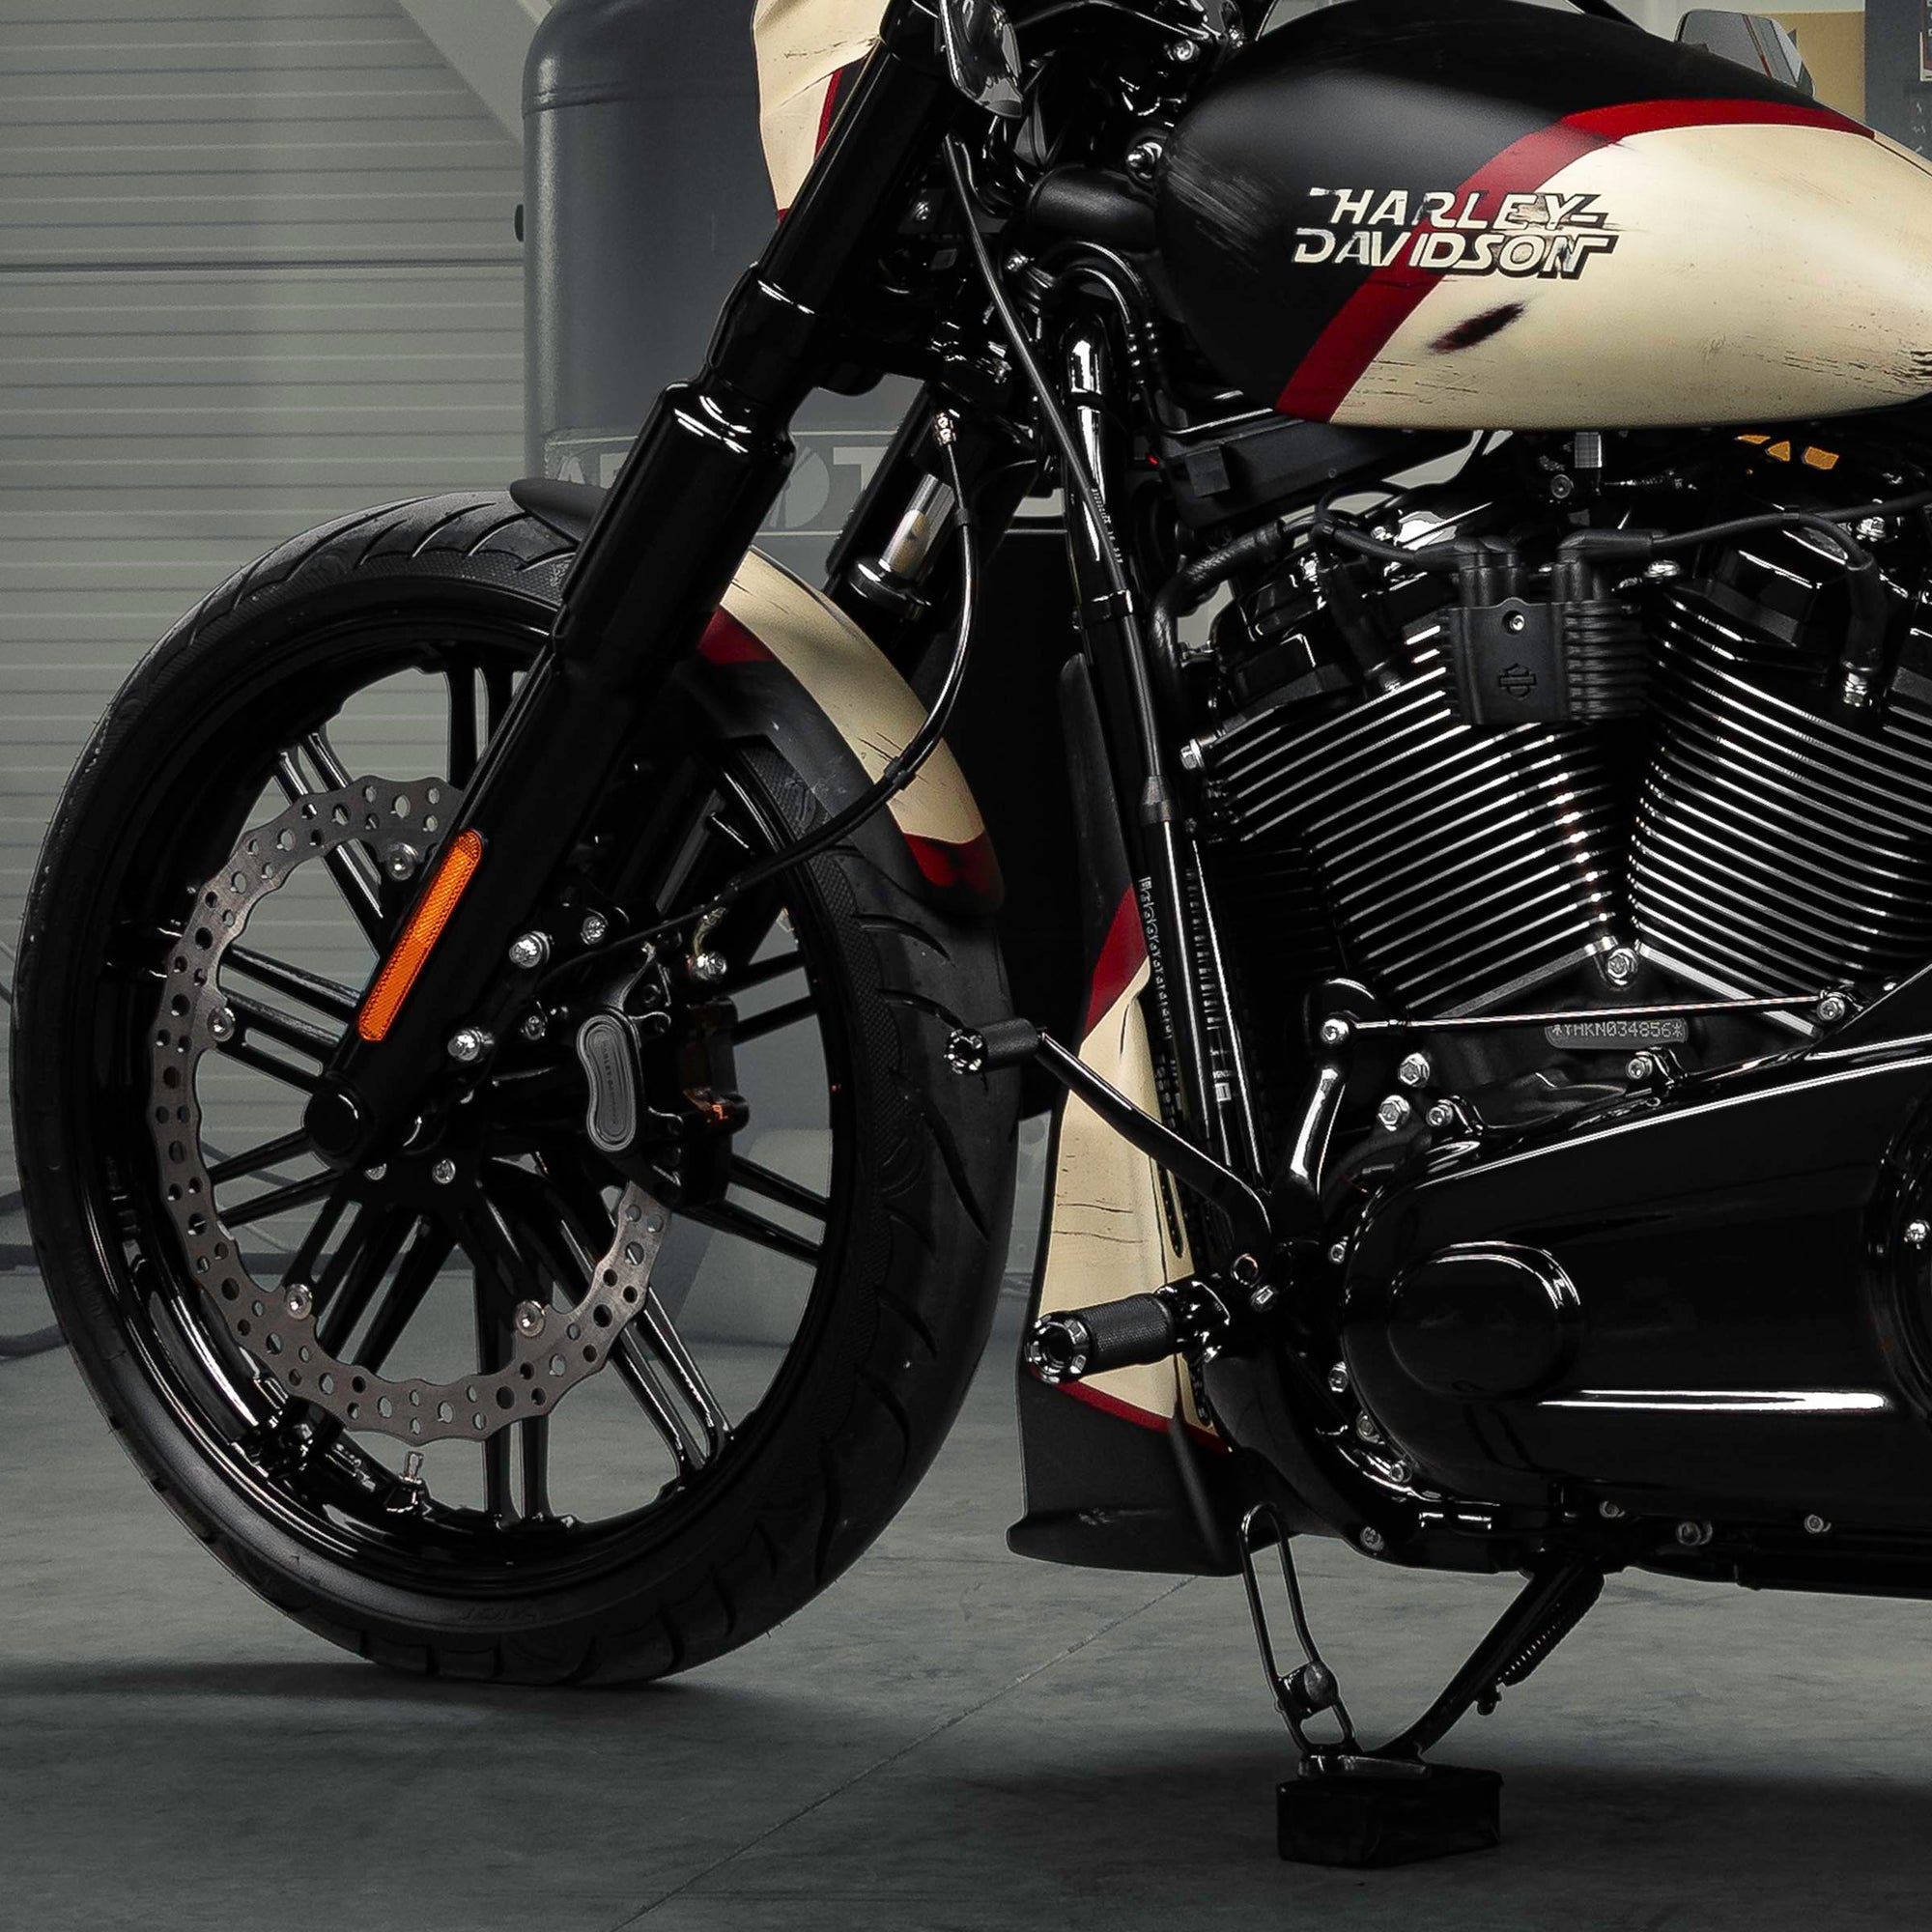 Zoomed Harley Davidson Breakout motorcycle with Killer Custom parts from the side in a modern bike shop